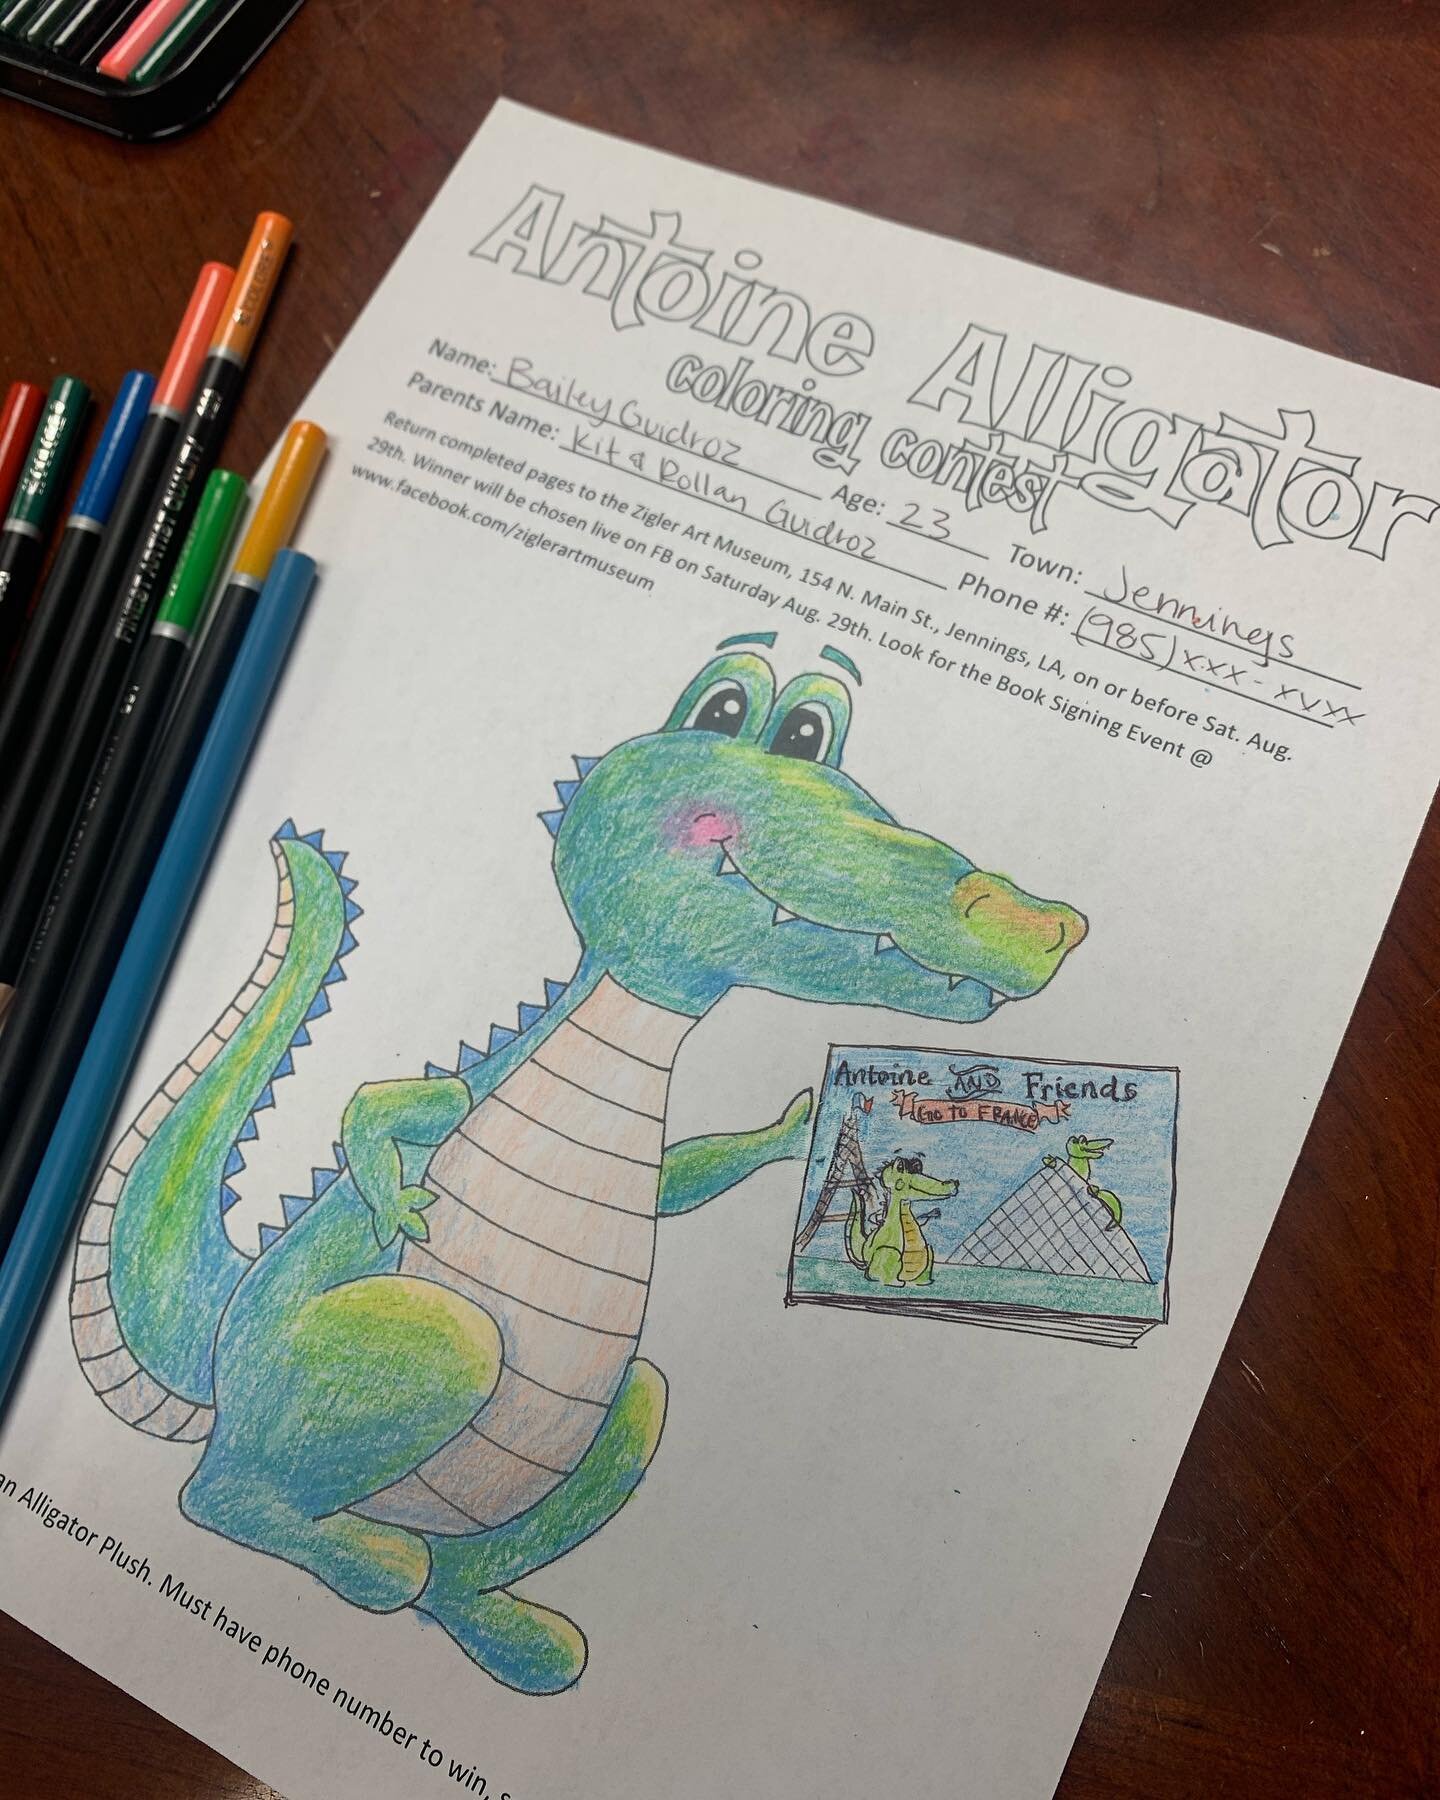 Need a break from gator hunting? Break out those crayons and enter our coloring contest for ANOTHER chance to win prizes!! Here's mine, but we wanna see how creative you guys can be! Come pick up a copy at ZAM today or message us for a printable link